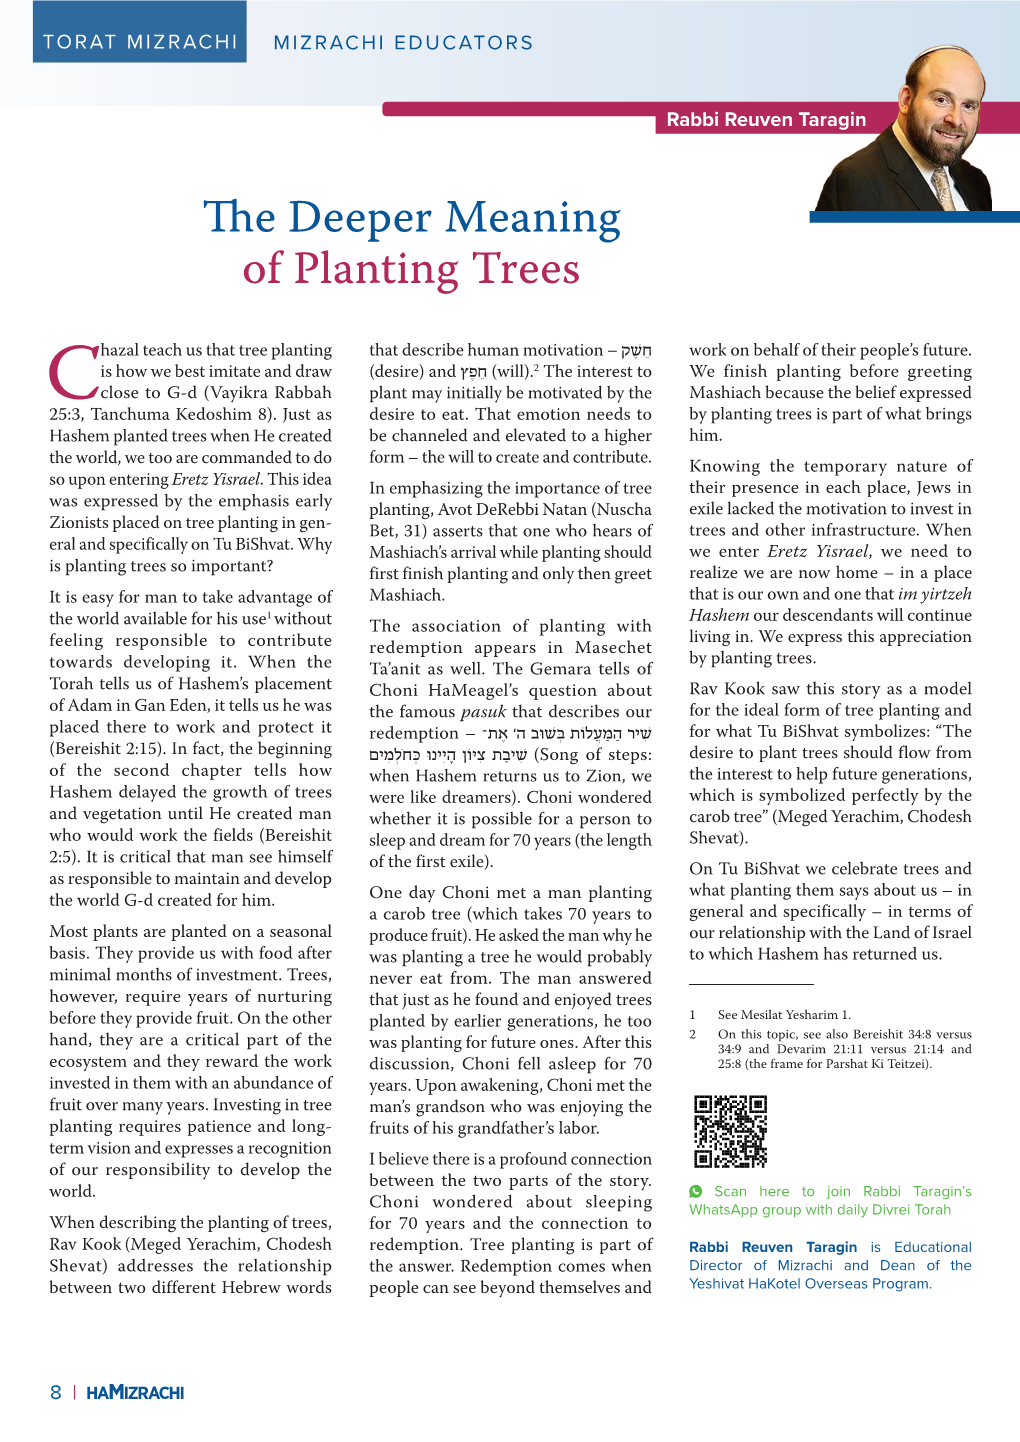 The Deeper Meaning of Planting Trees